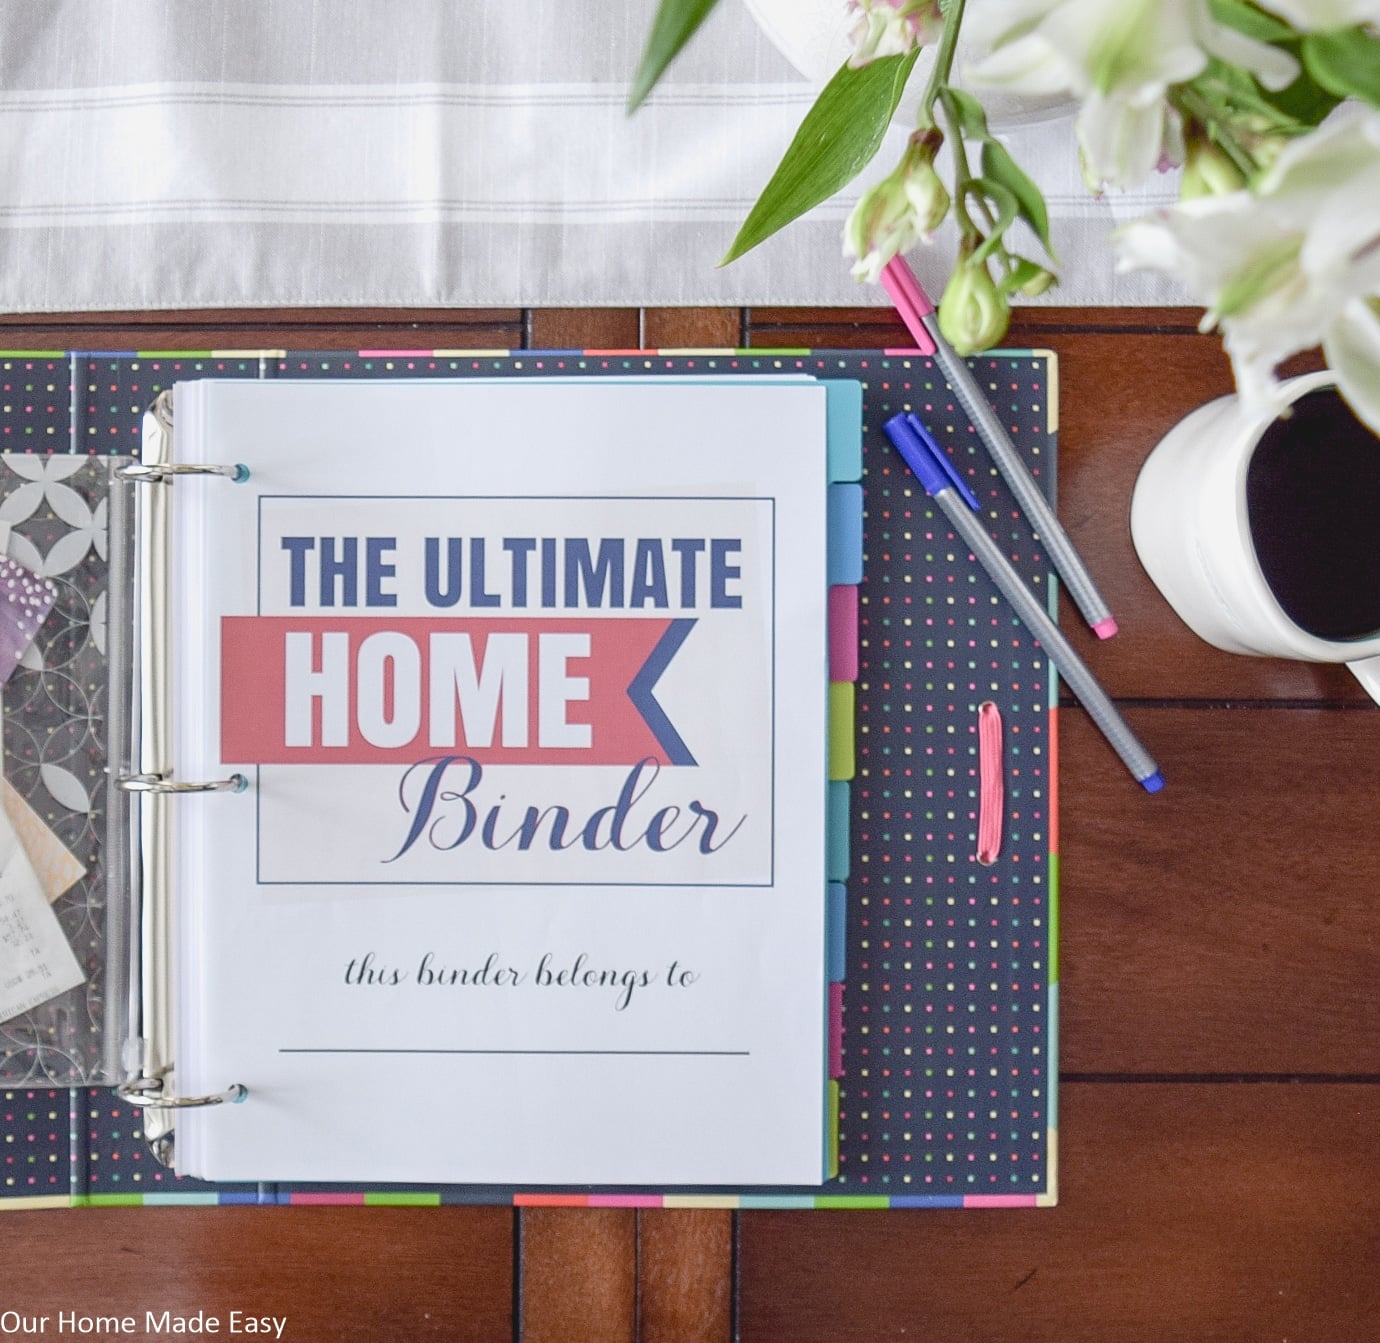 The Ultimate Home Binder is your secret to success! Dress up your binder with these fun holiday covers